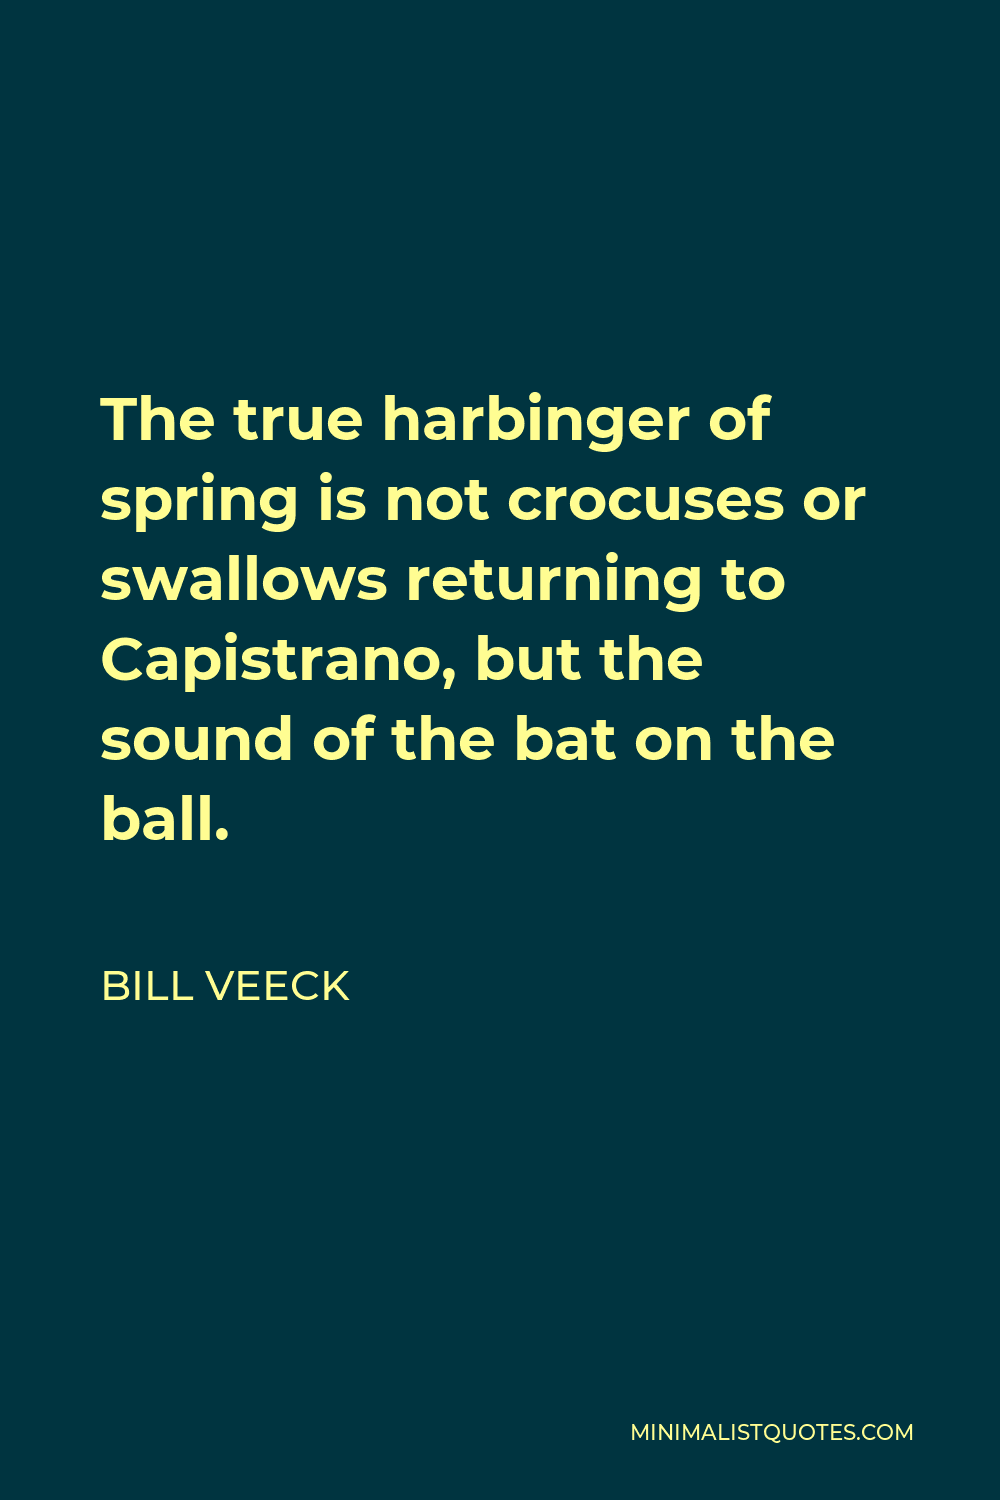 Bill Veeck Quote - The true harbinger of spring is not crocuses or swallows returning to Capistrano, but the sound of the bat on the ball.